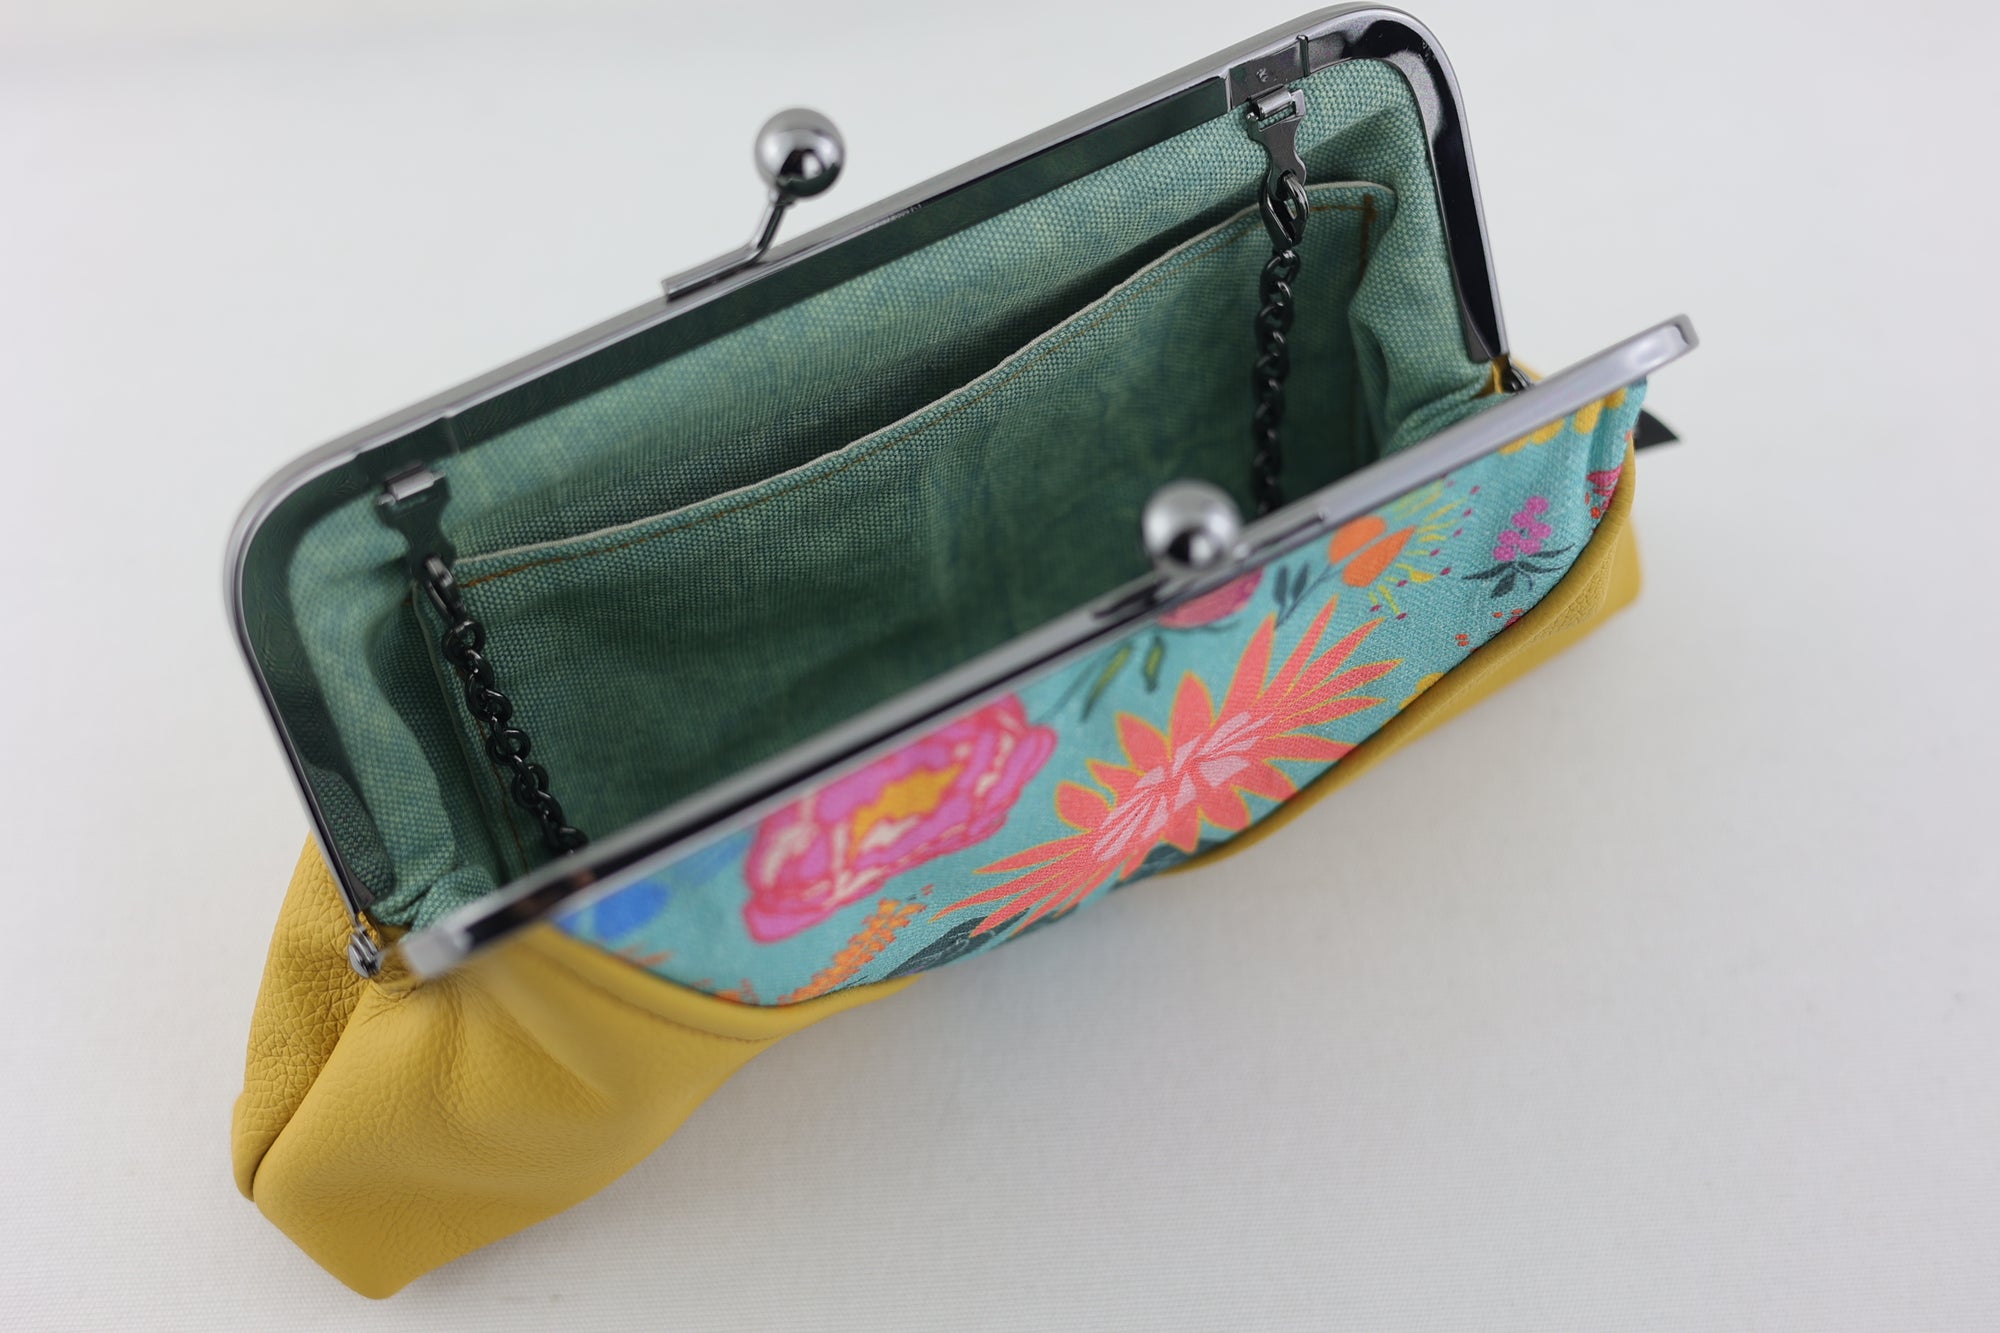 Bright & Bold Flowers Kisslock Clutch with Chain Strap | PINK OASIS